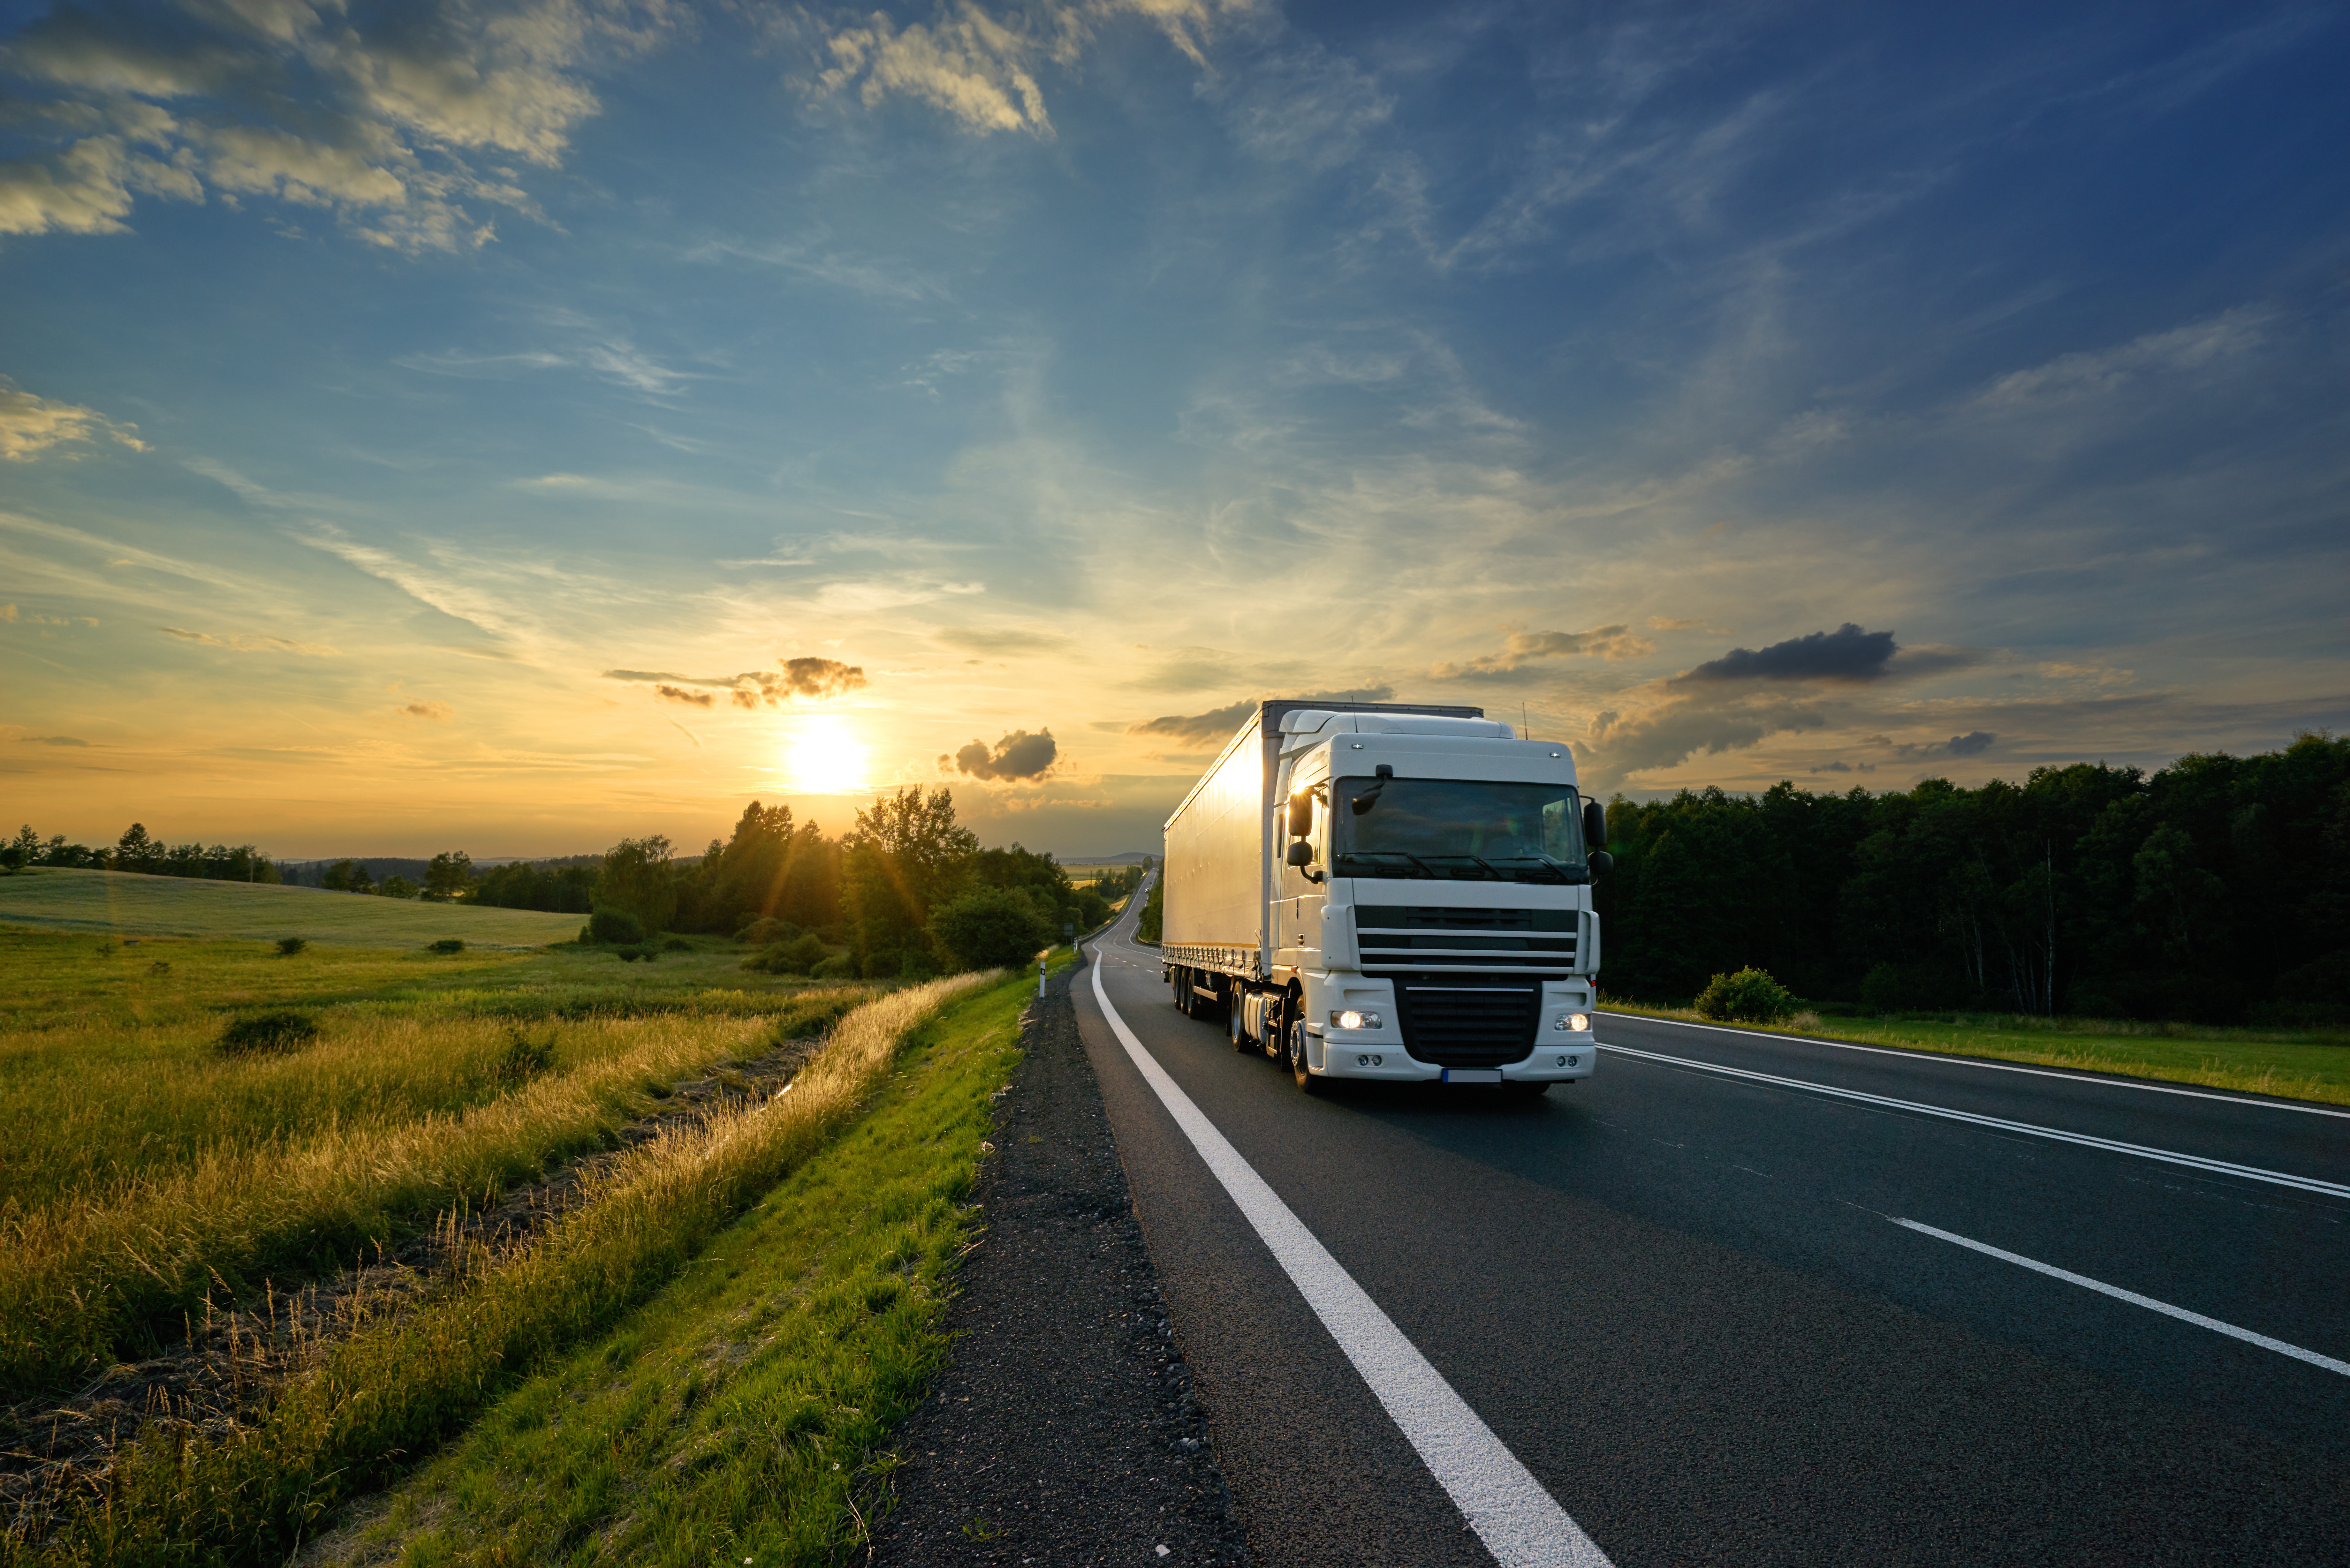 "Transport for own account" within the meaning of the Road Transport Act